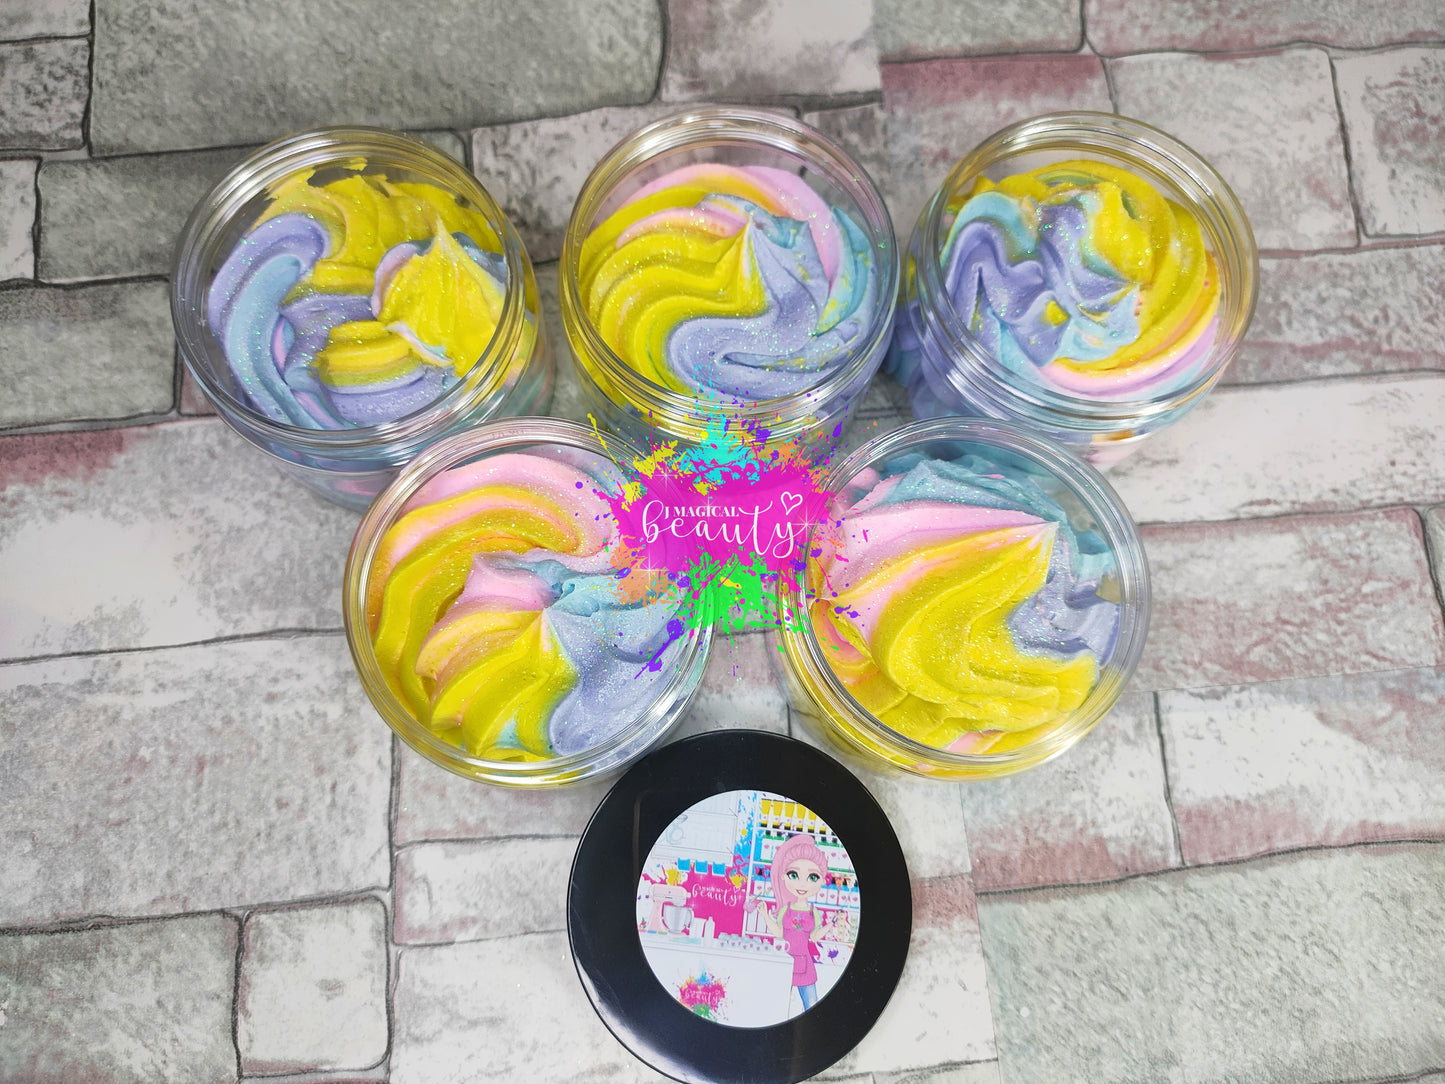 Whipped Soap Unicorn Farts scent